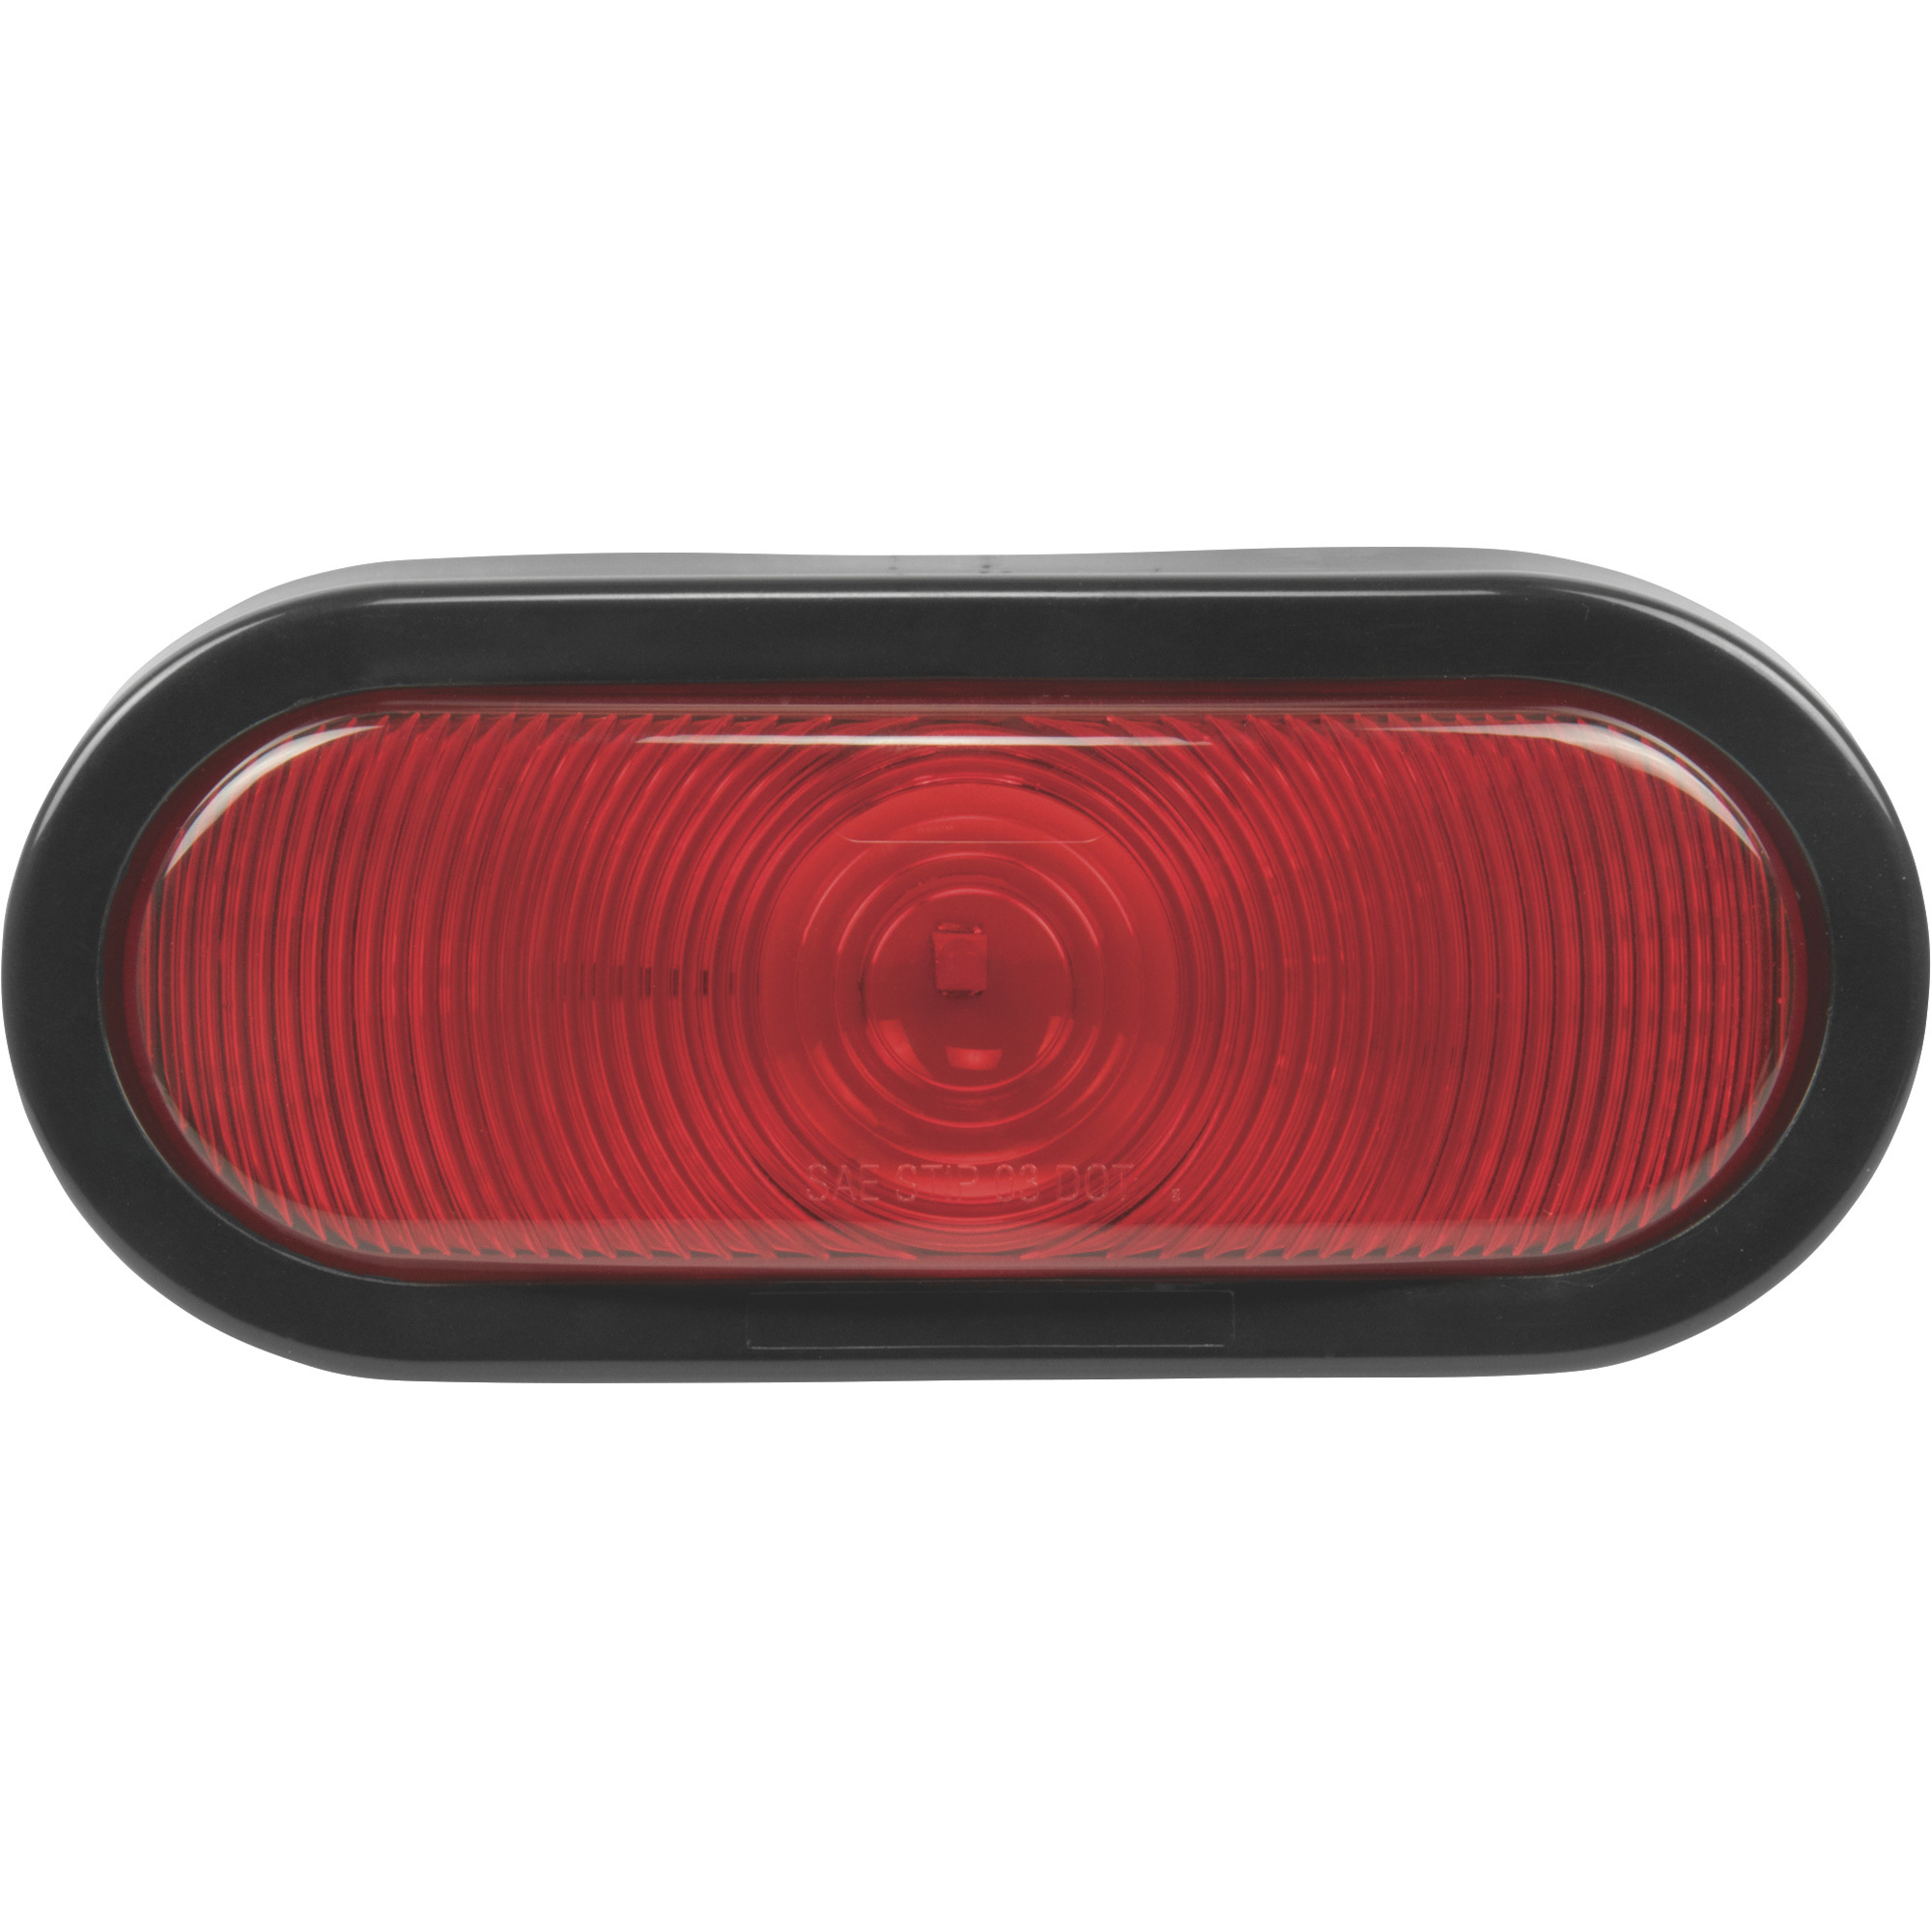 Hopkins Towing Solutions LED Stop/Tail/Turn Light â 6Inch Oval, Red, Model C561PTM